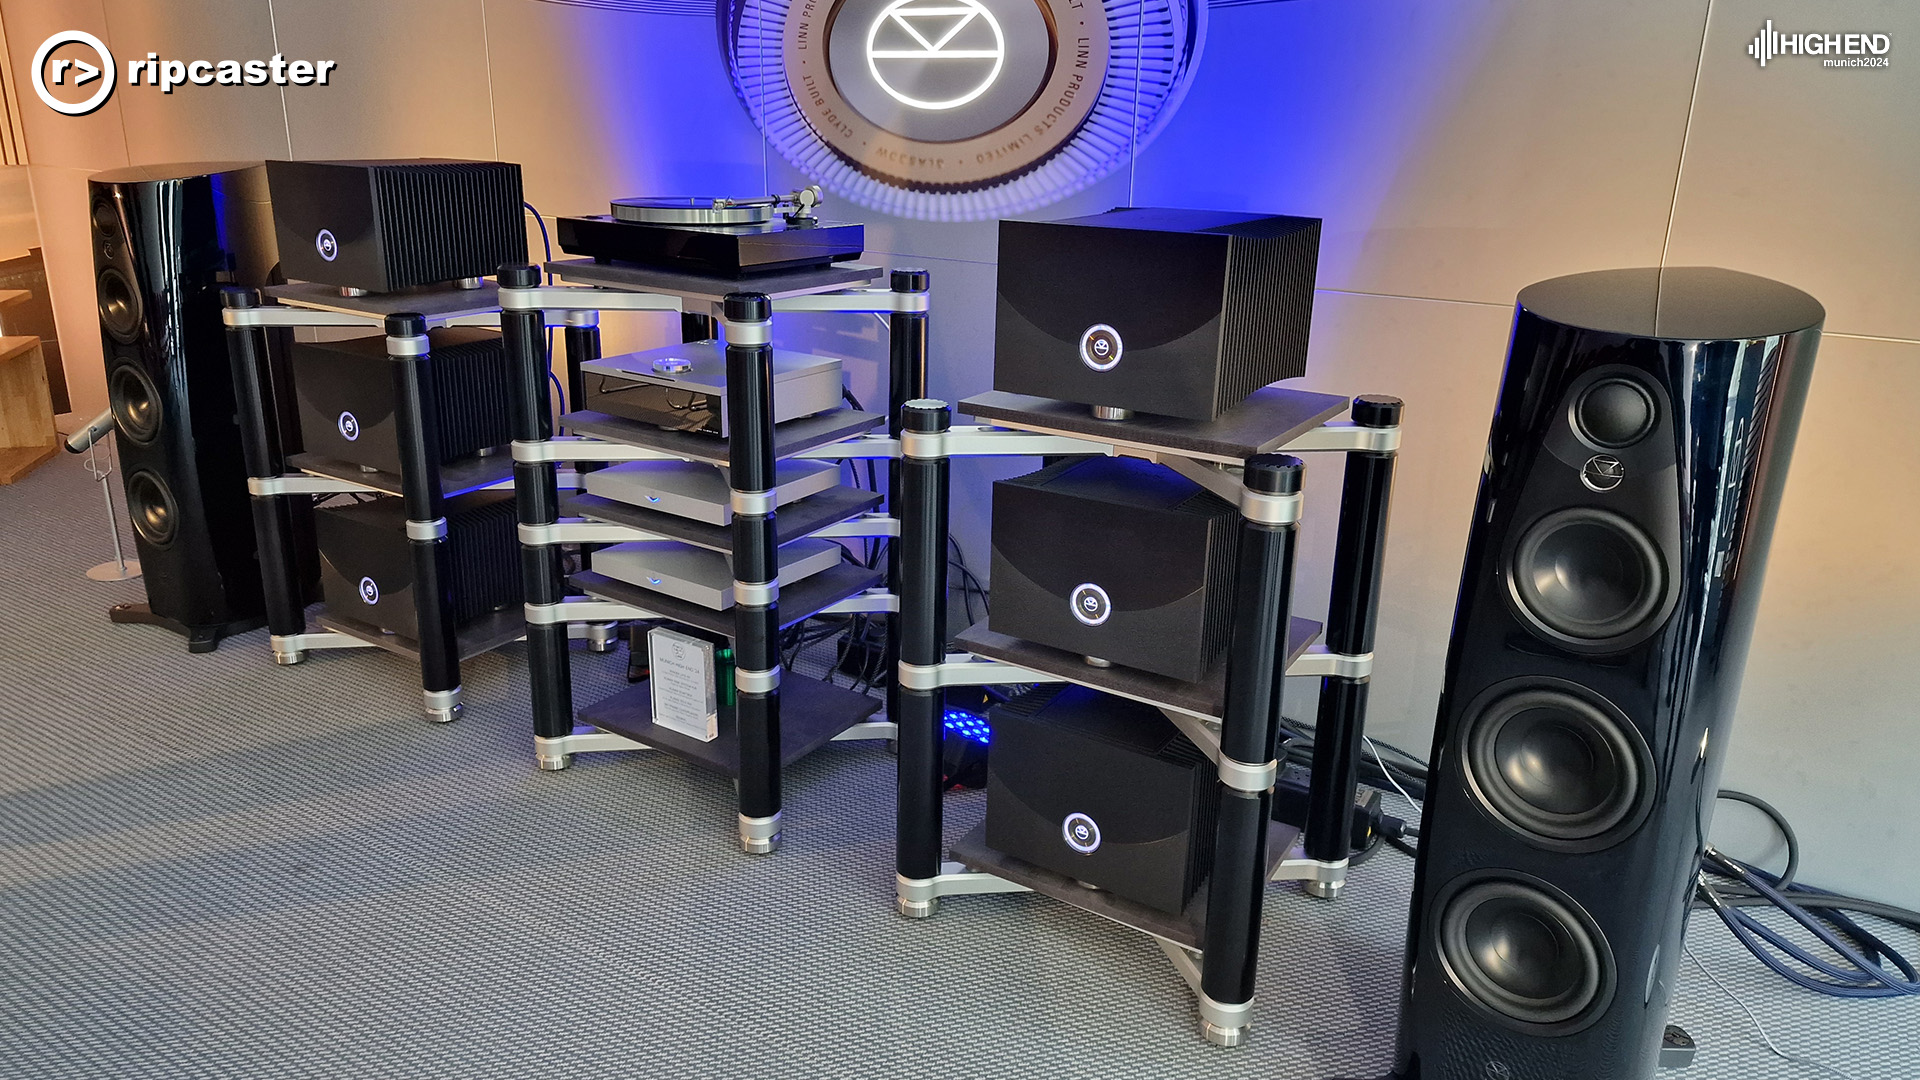 A lot of Linn equipment including a pair of floorstanding speakers, one either side of the image.